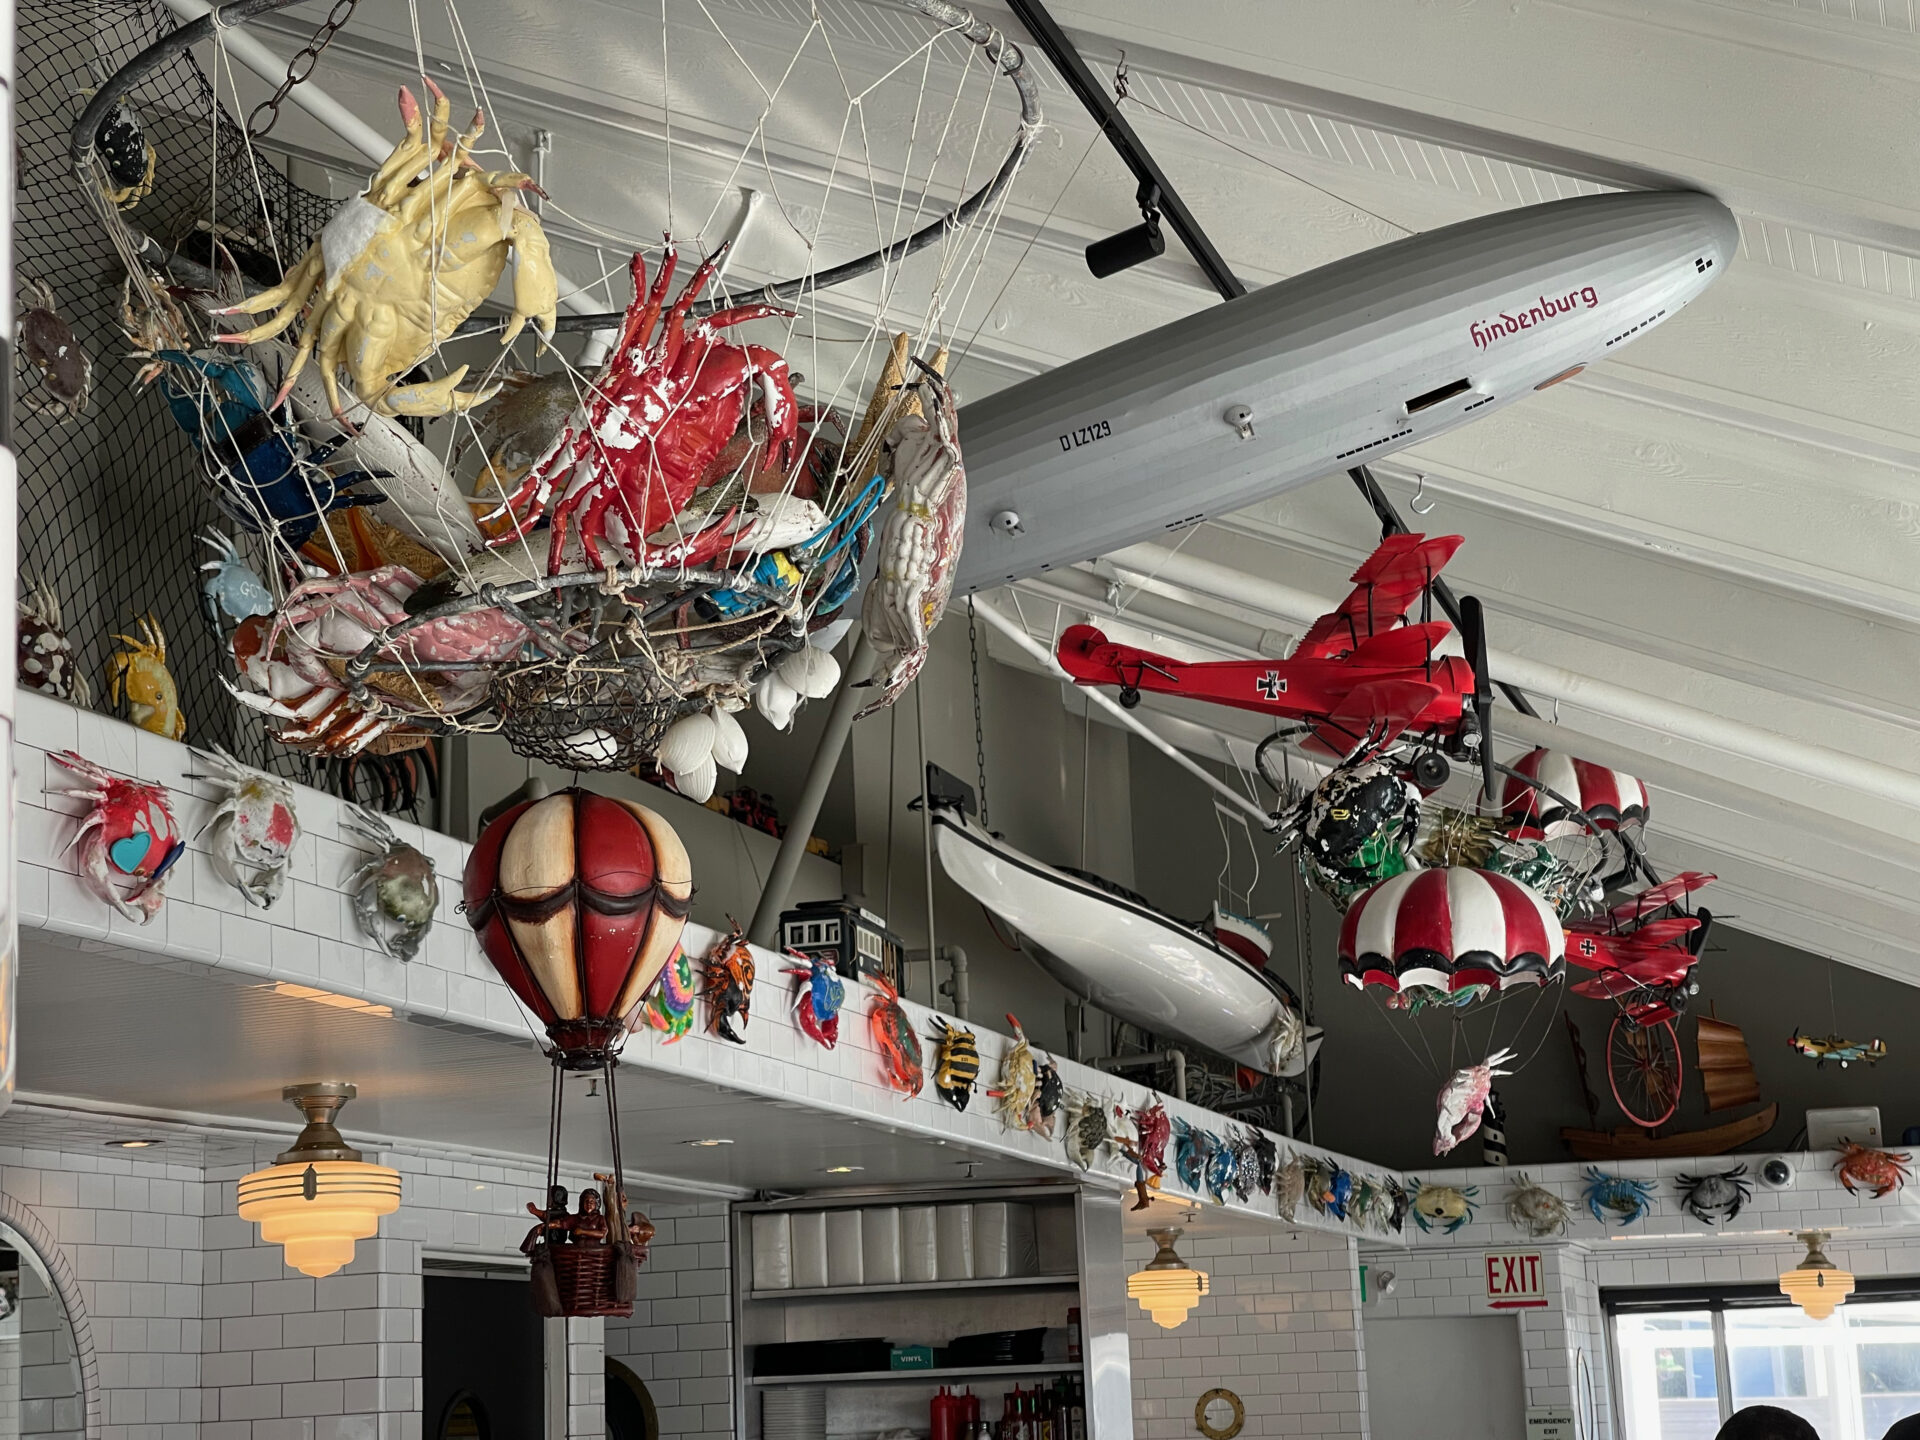 Ceiling designs: net with crabs, planes, and hot air balloons (scaled)